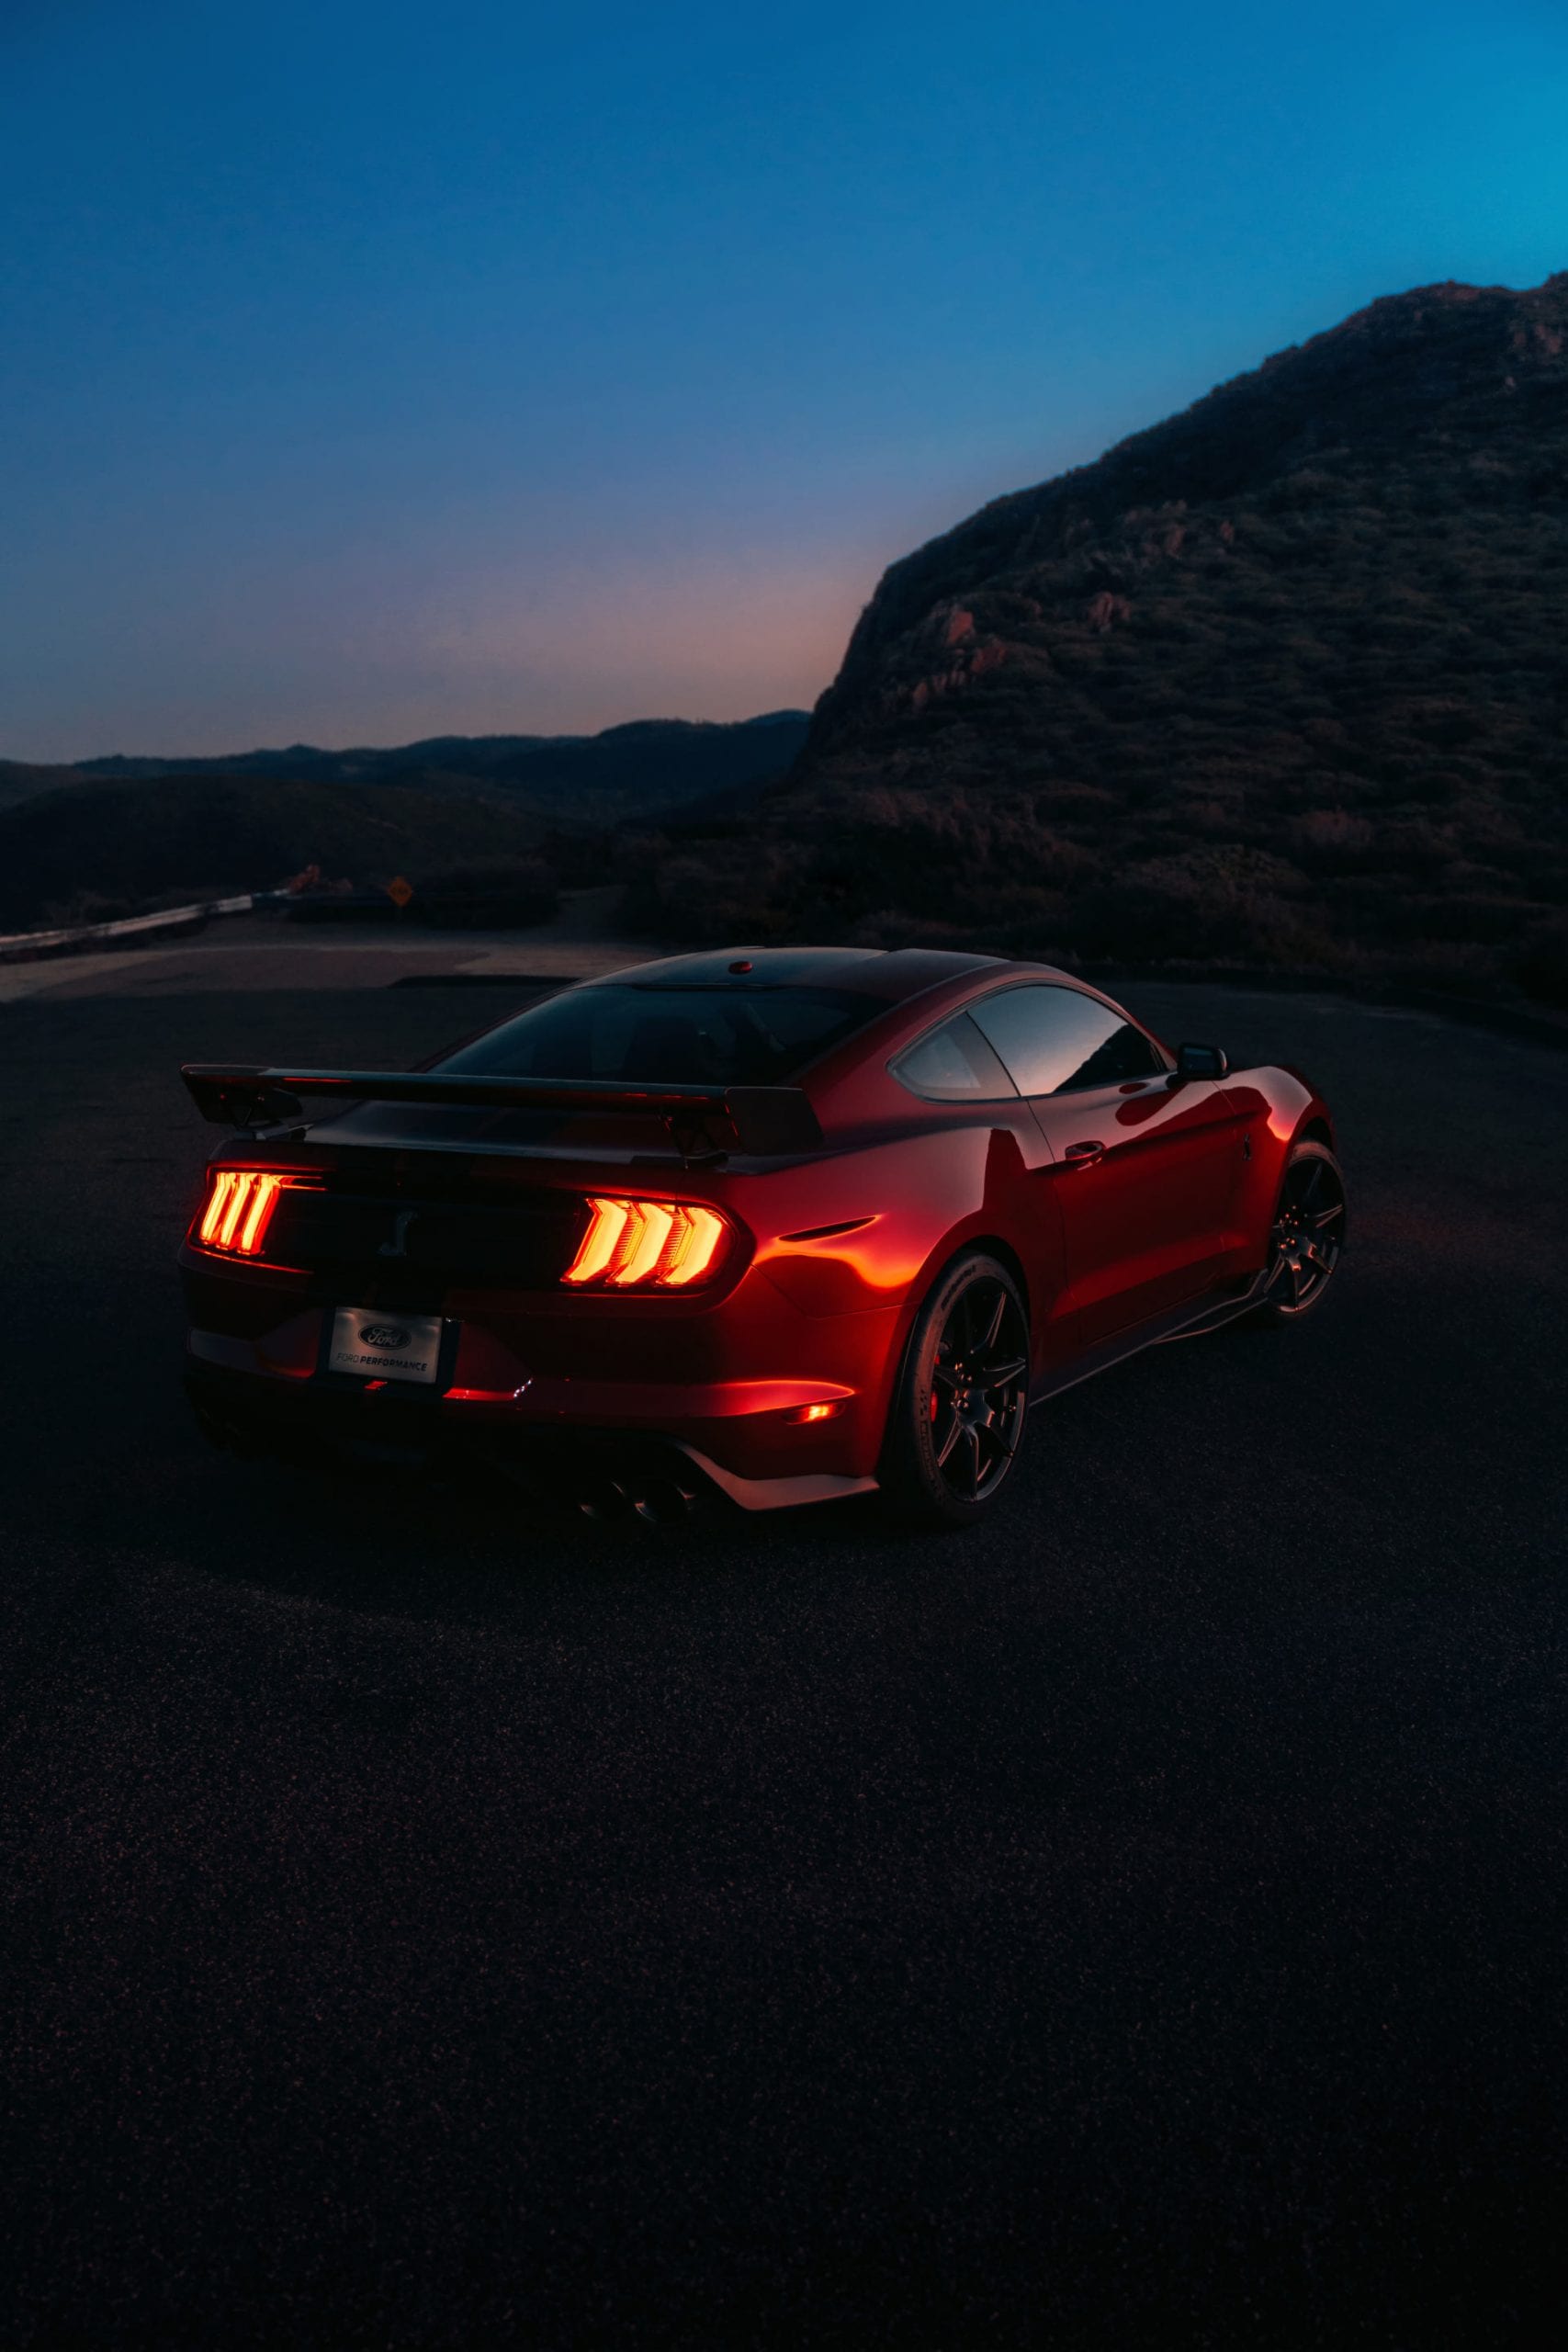 Rear view of the Shelby GT500 sports car